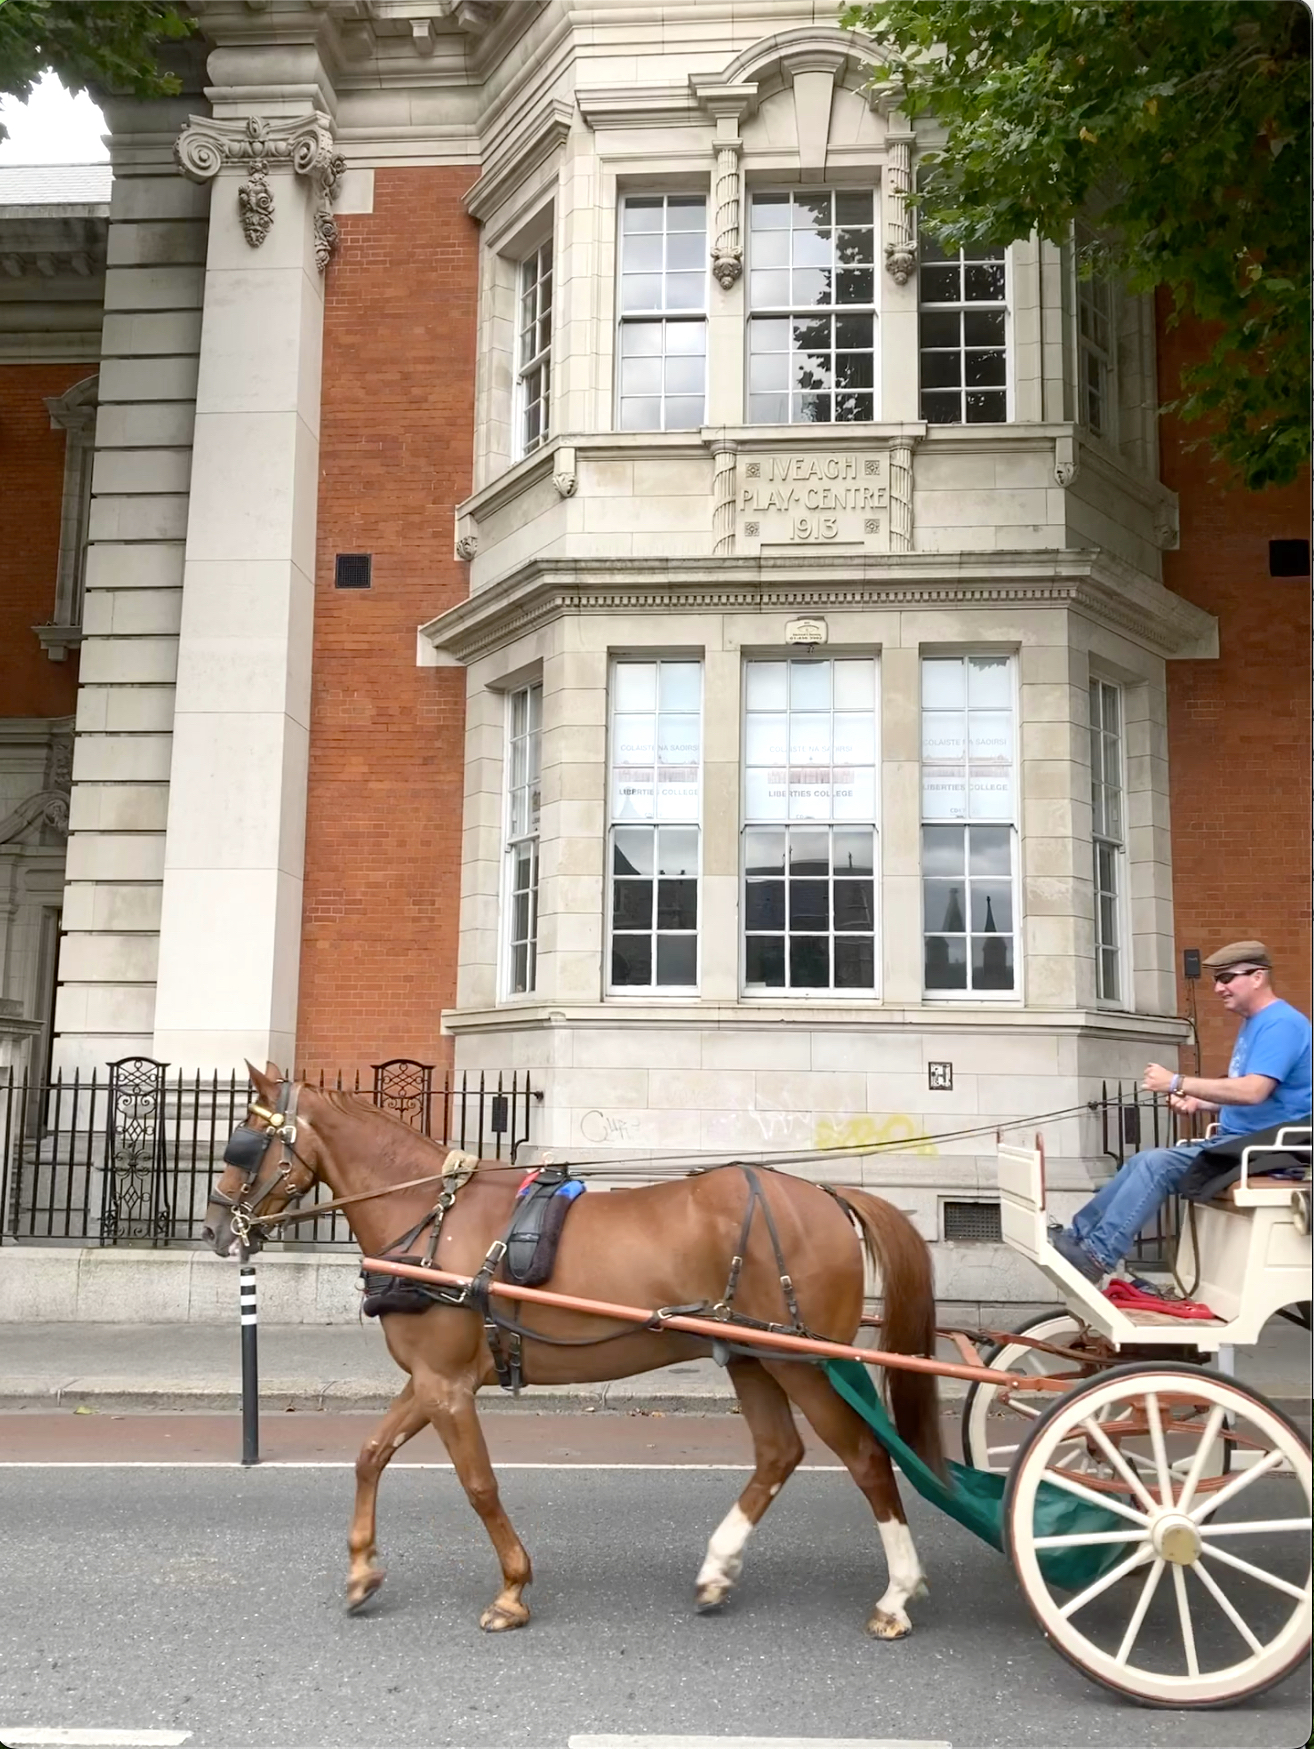 Exterior of building with horse carriage on the foreground